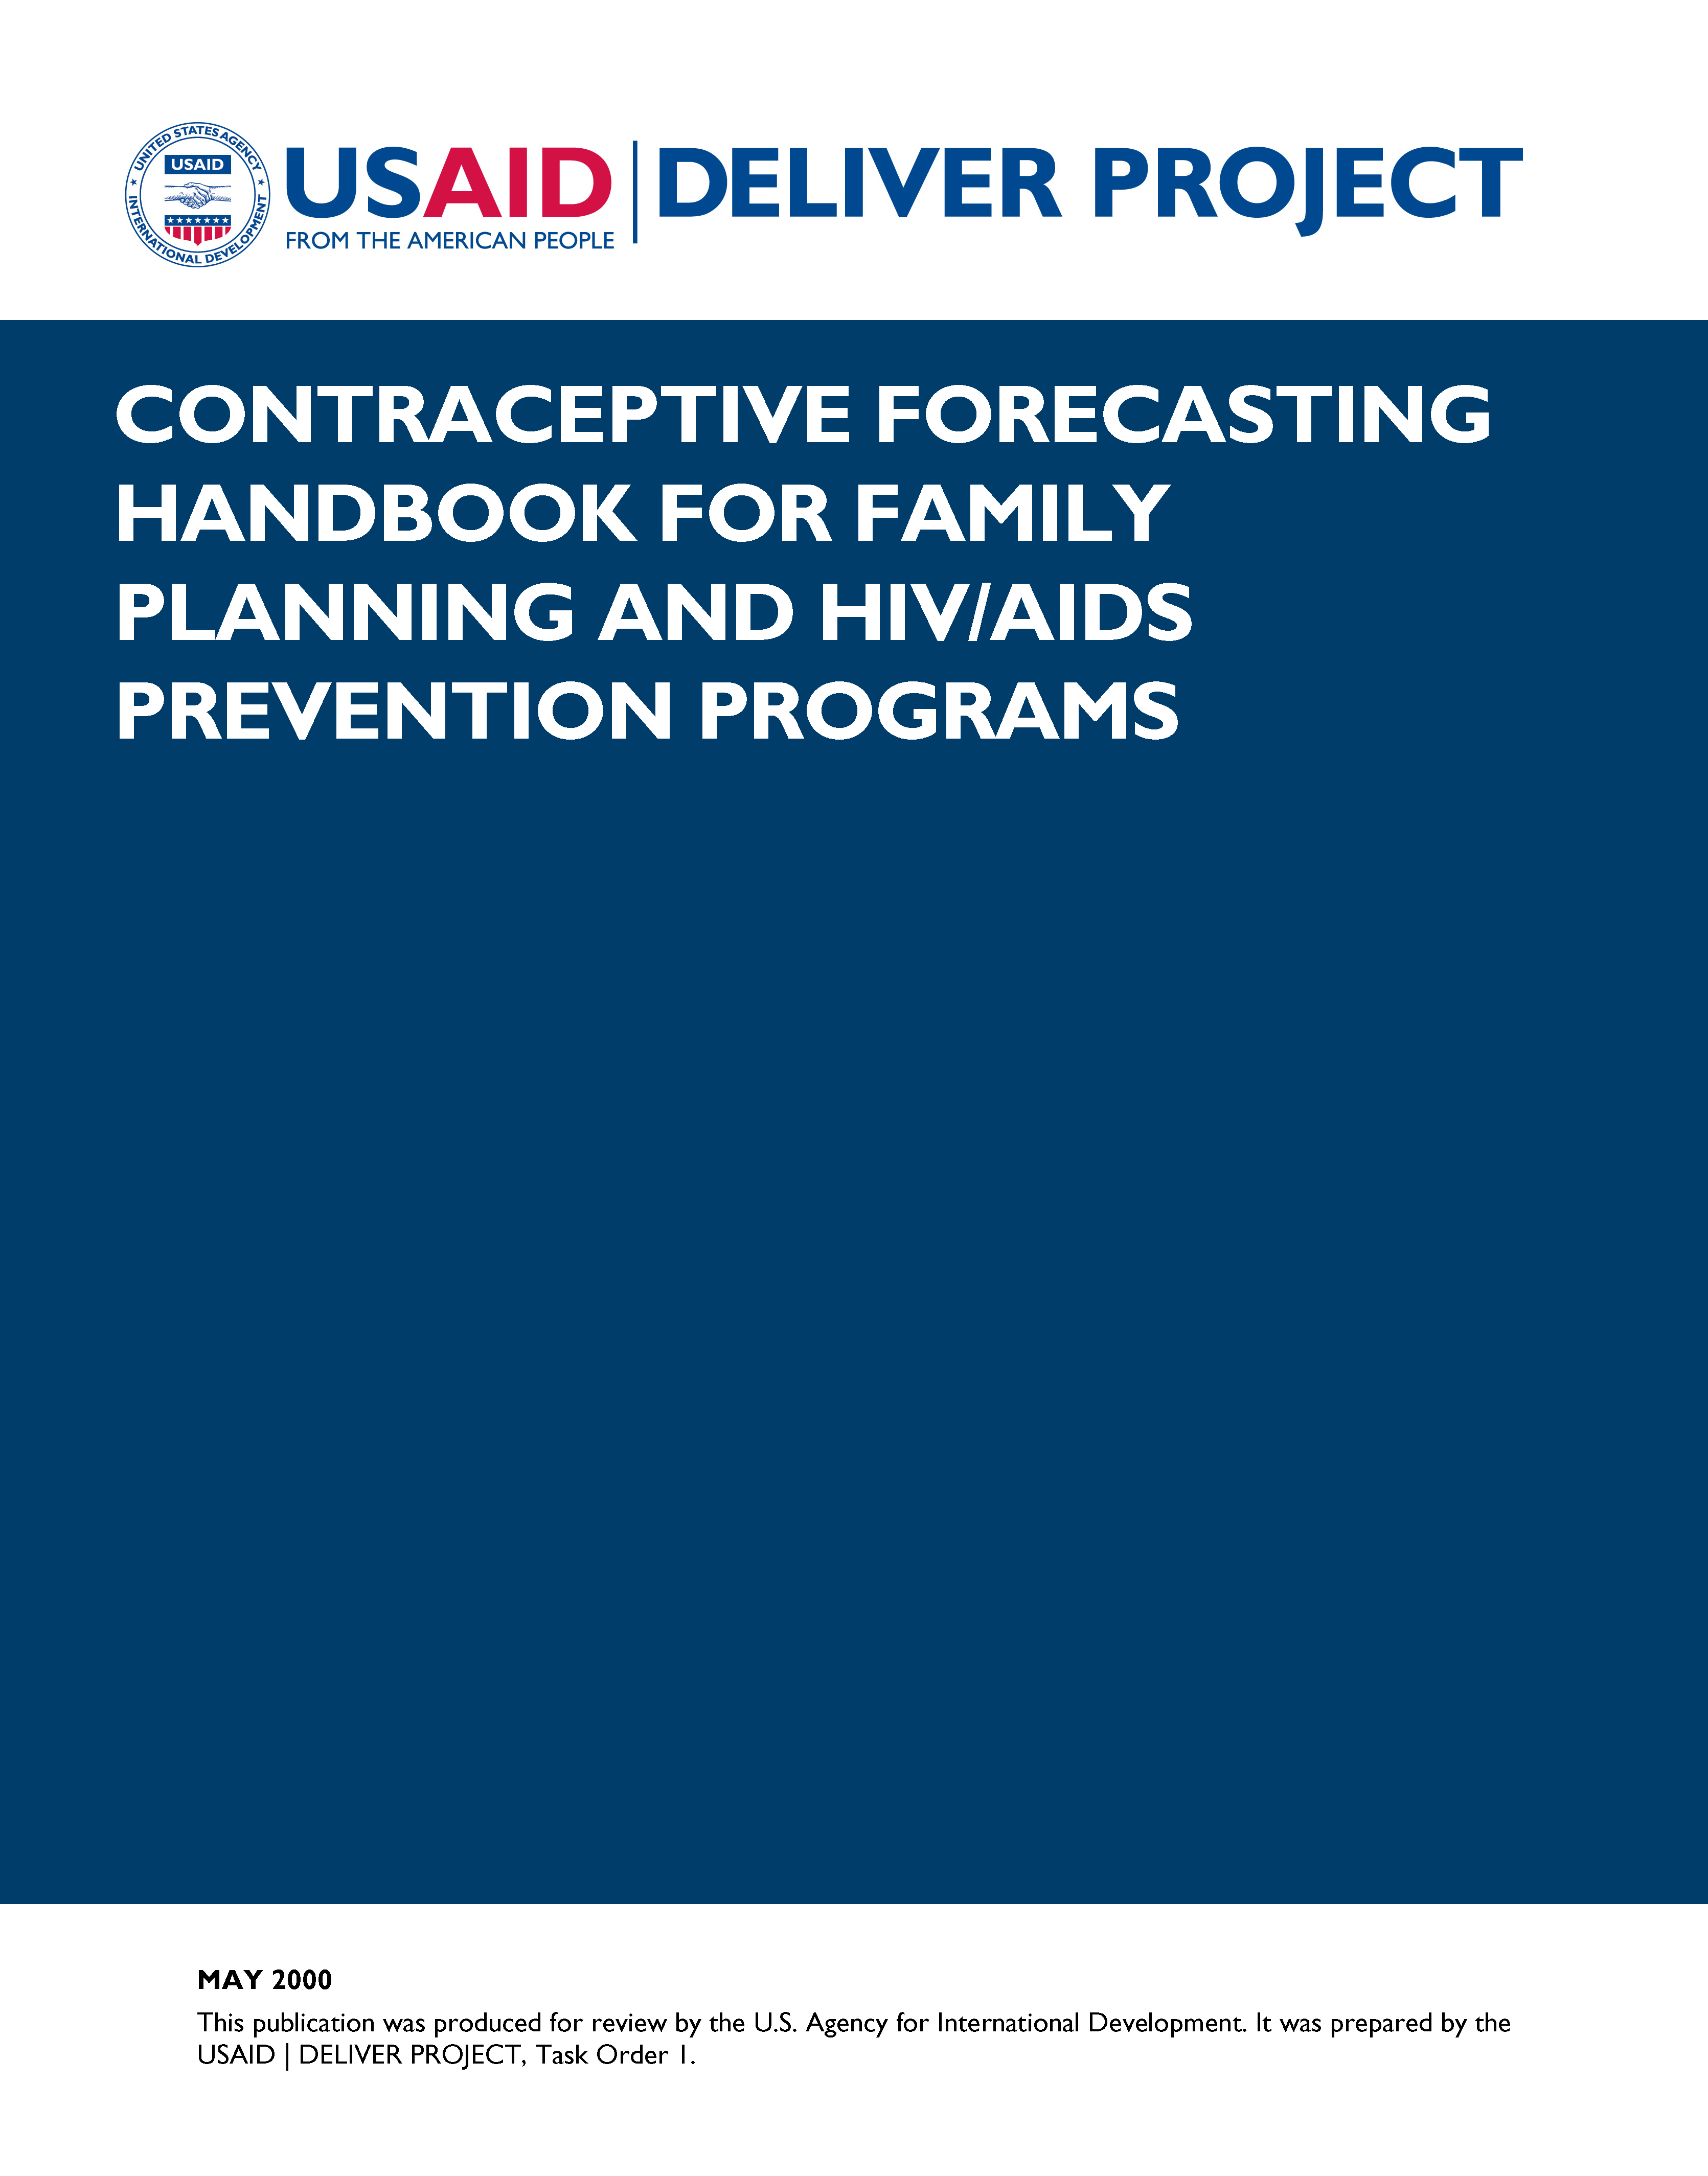 Cover for Contraceptive Forecasting Handbook for Family Planning and HIV/AIDS Prevention Programs